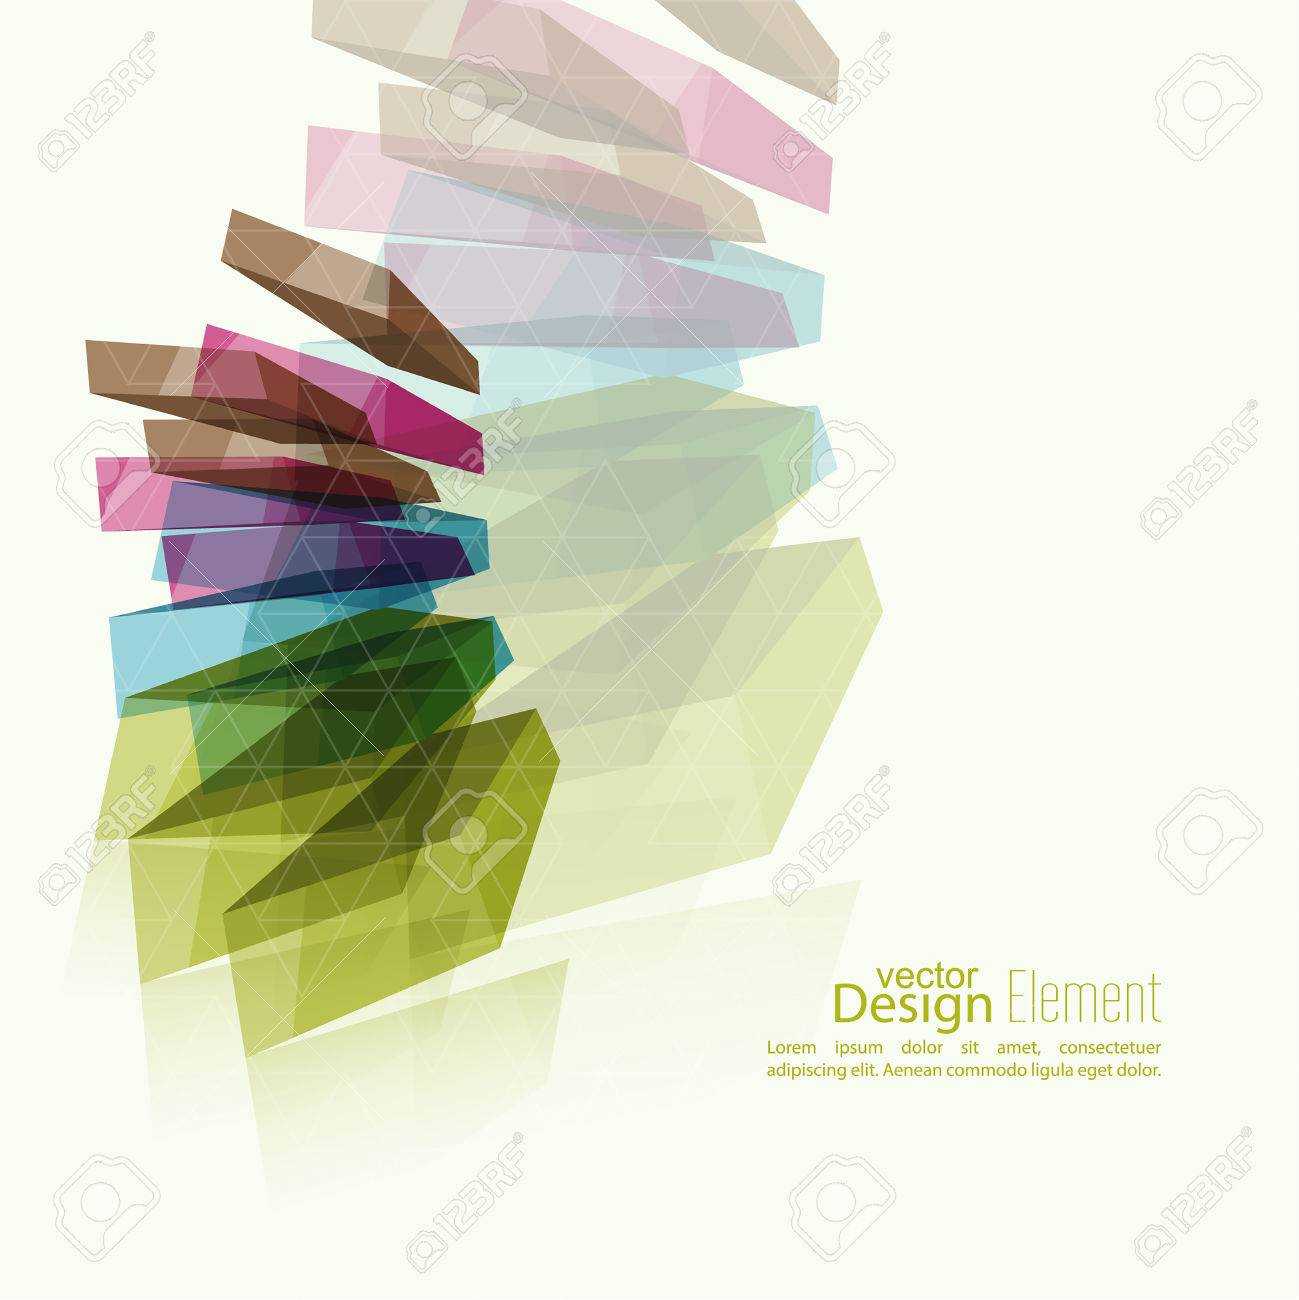 Abstract Background With Colored Crystals, Trellis Structure. For Cover  Book, Brochure, Flyer, Poster, Magazine, Booklet, Leaflet, Cd Cover Design, Intended For Mobile Book Report Template